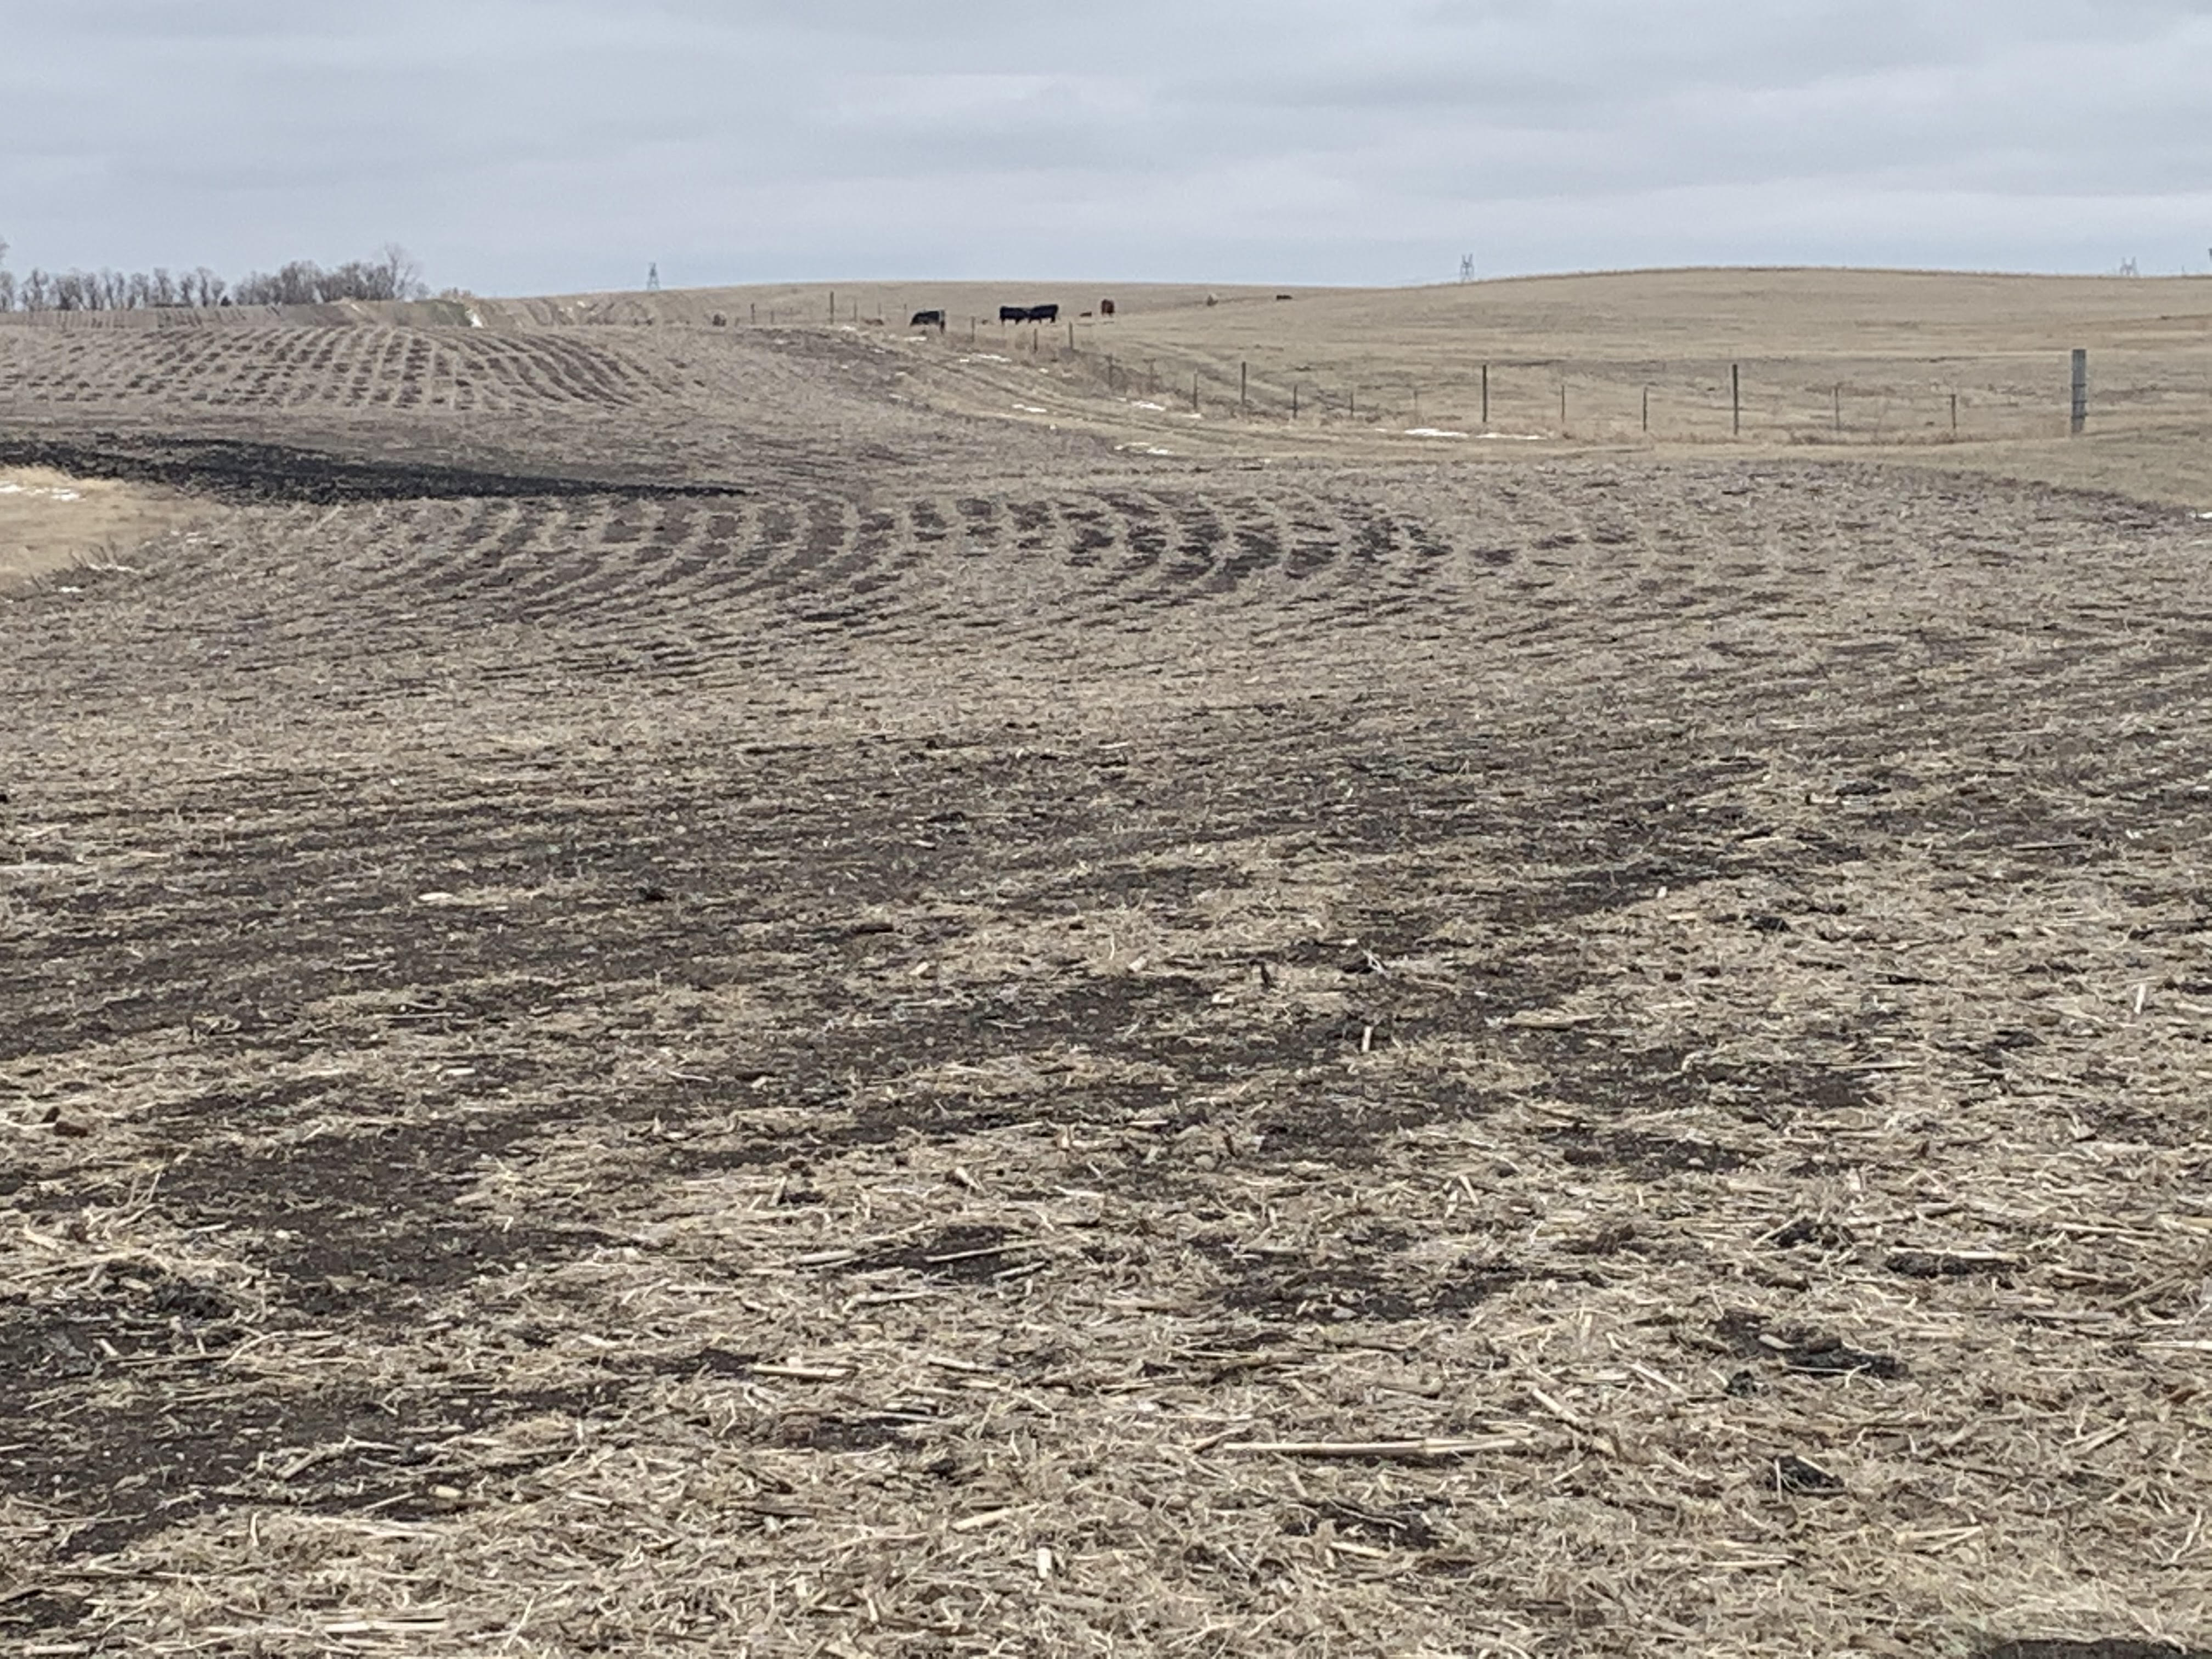 Afternoon Ag News, May 6, 2021: Planting progress continues in Barnes County